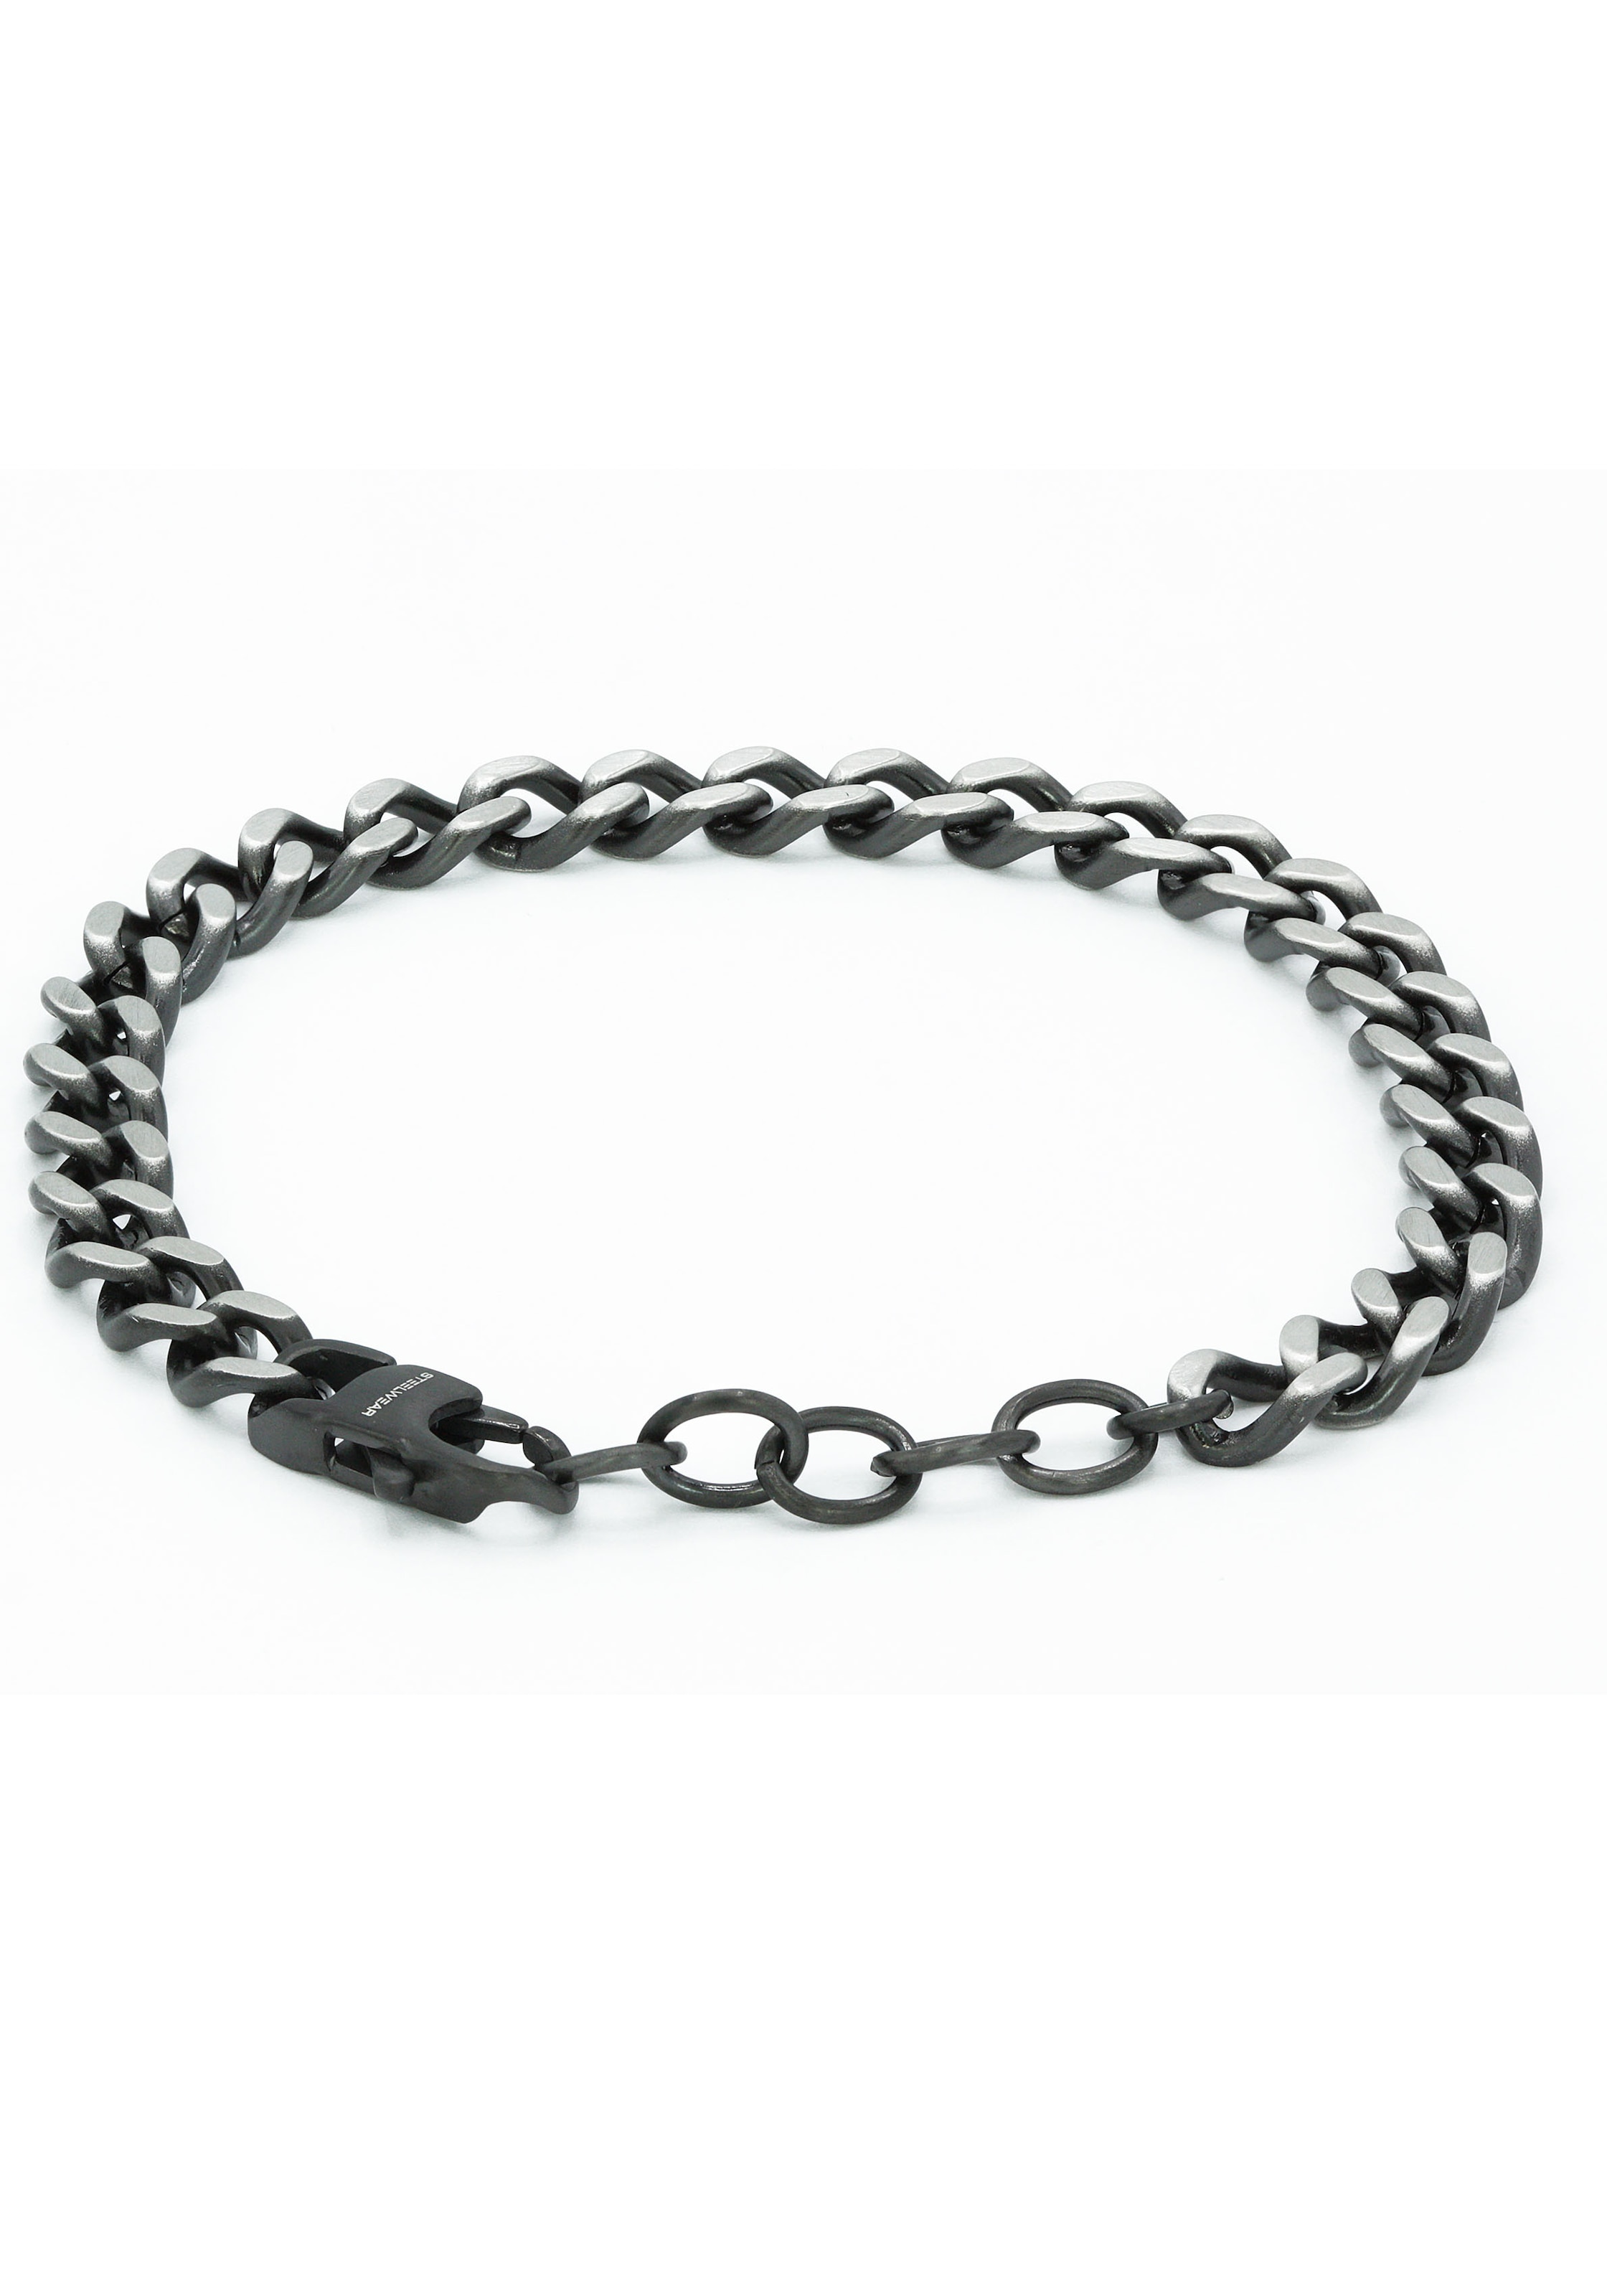 STEELWEAR Armband »Buenos Aires, SW-635«